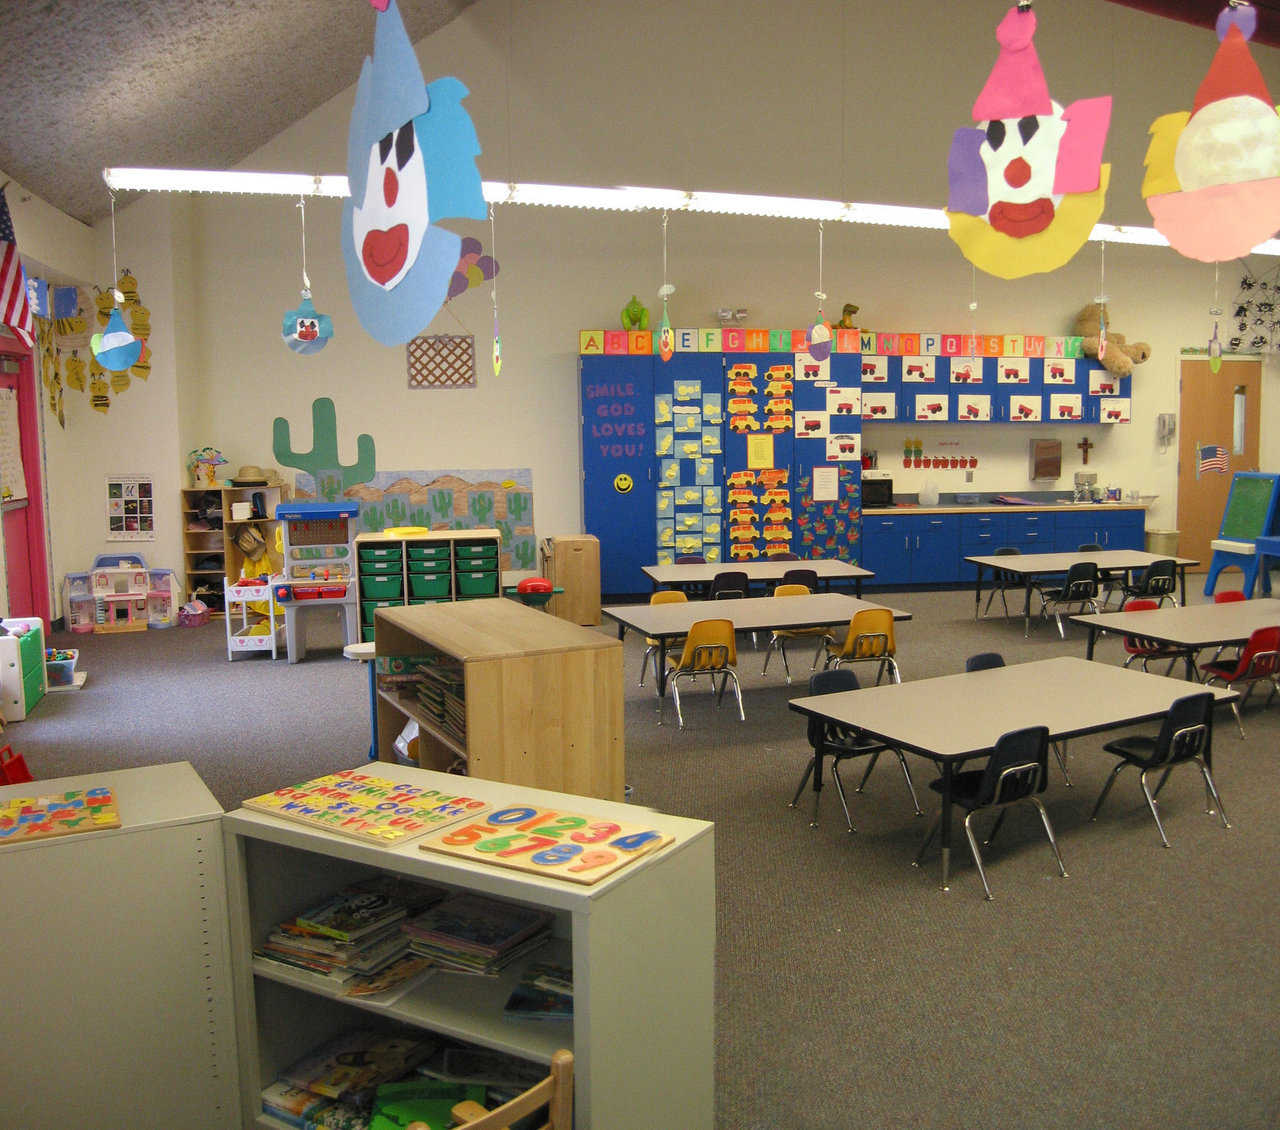 Bright and cheerful — Colorful clown faces hover over the work tables in this kindergarten.